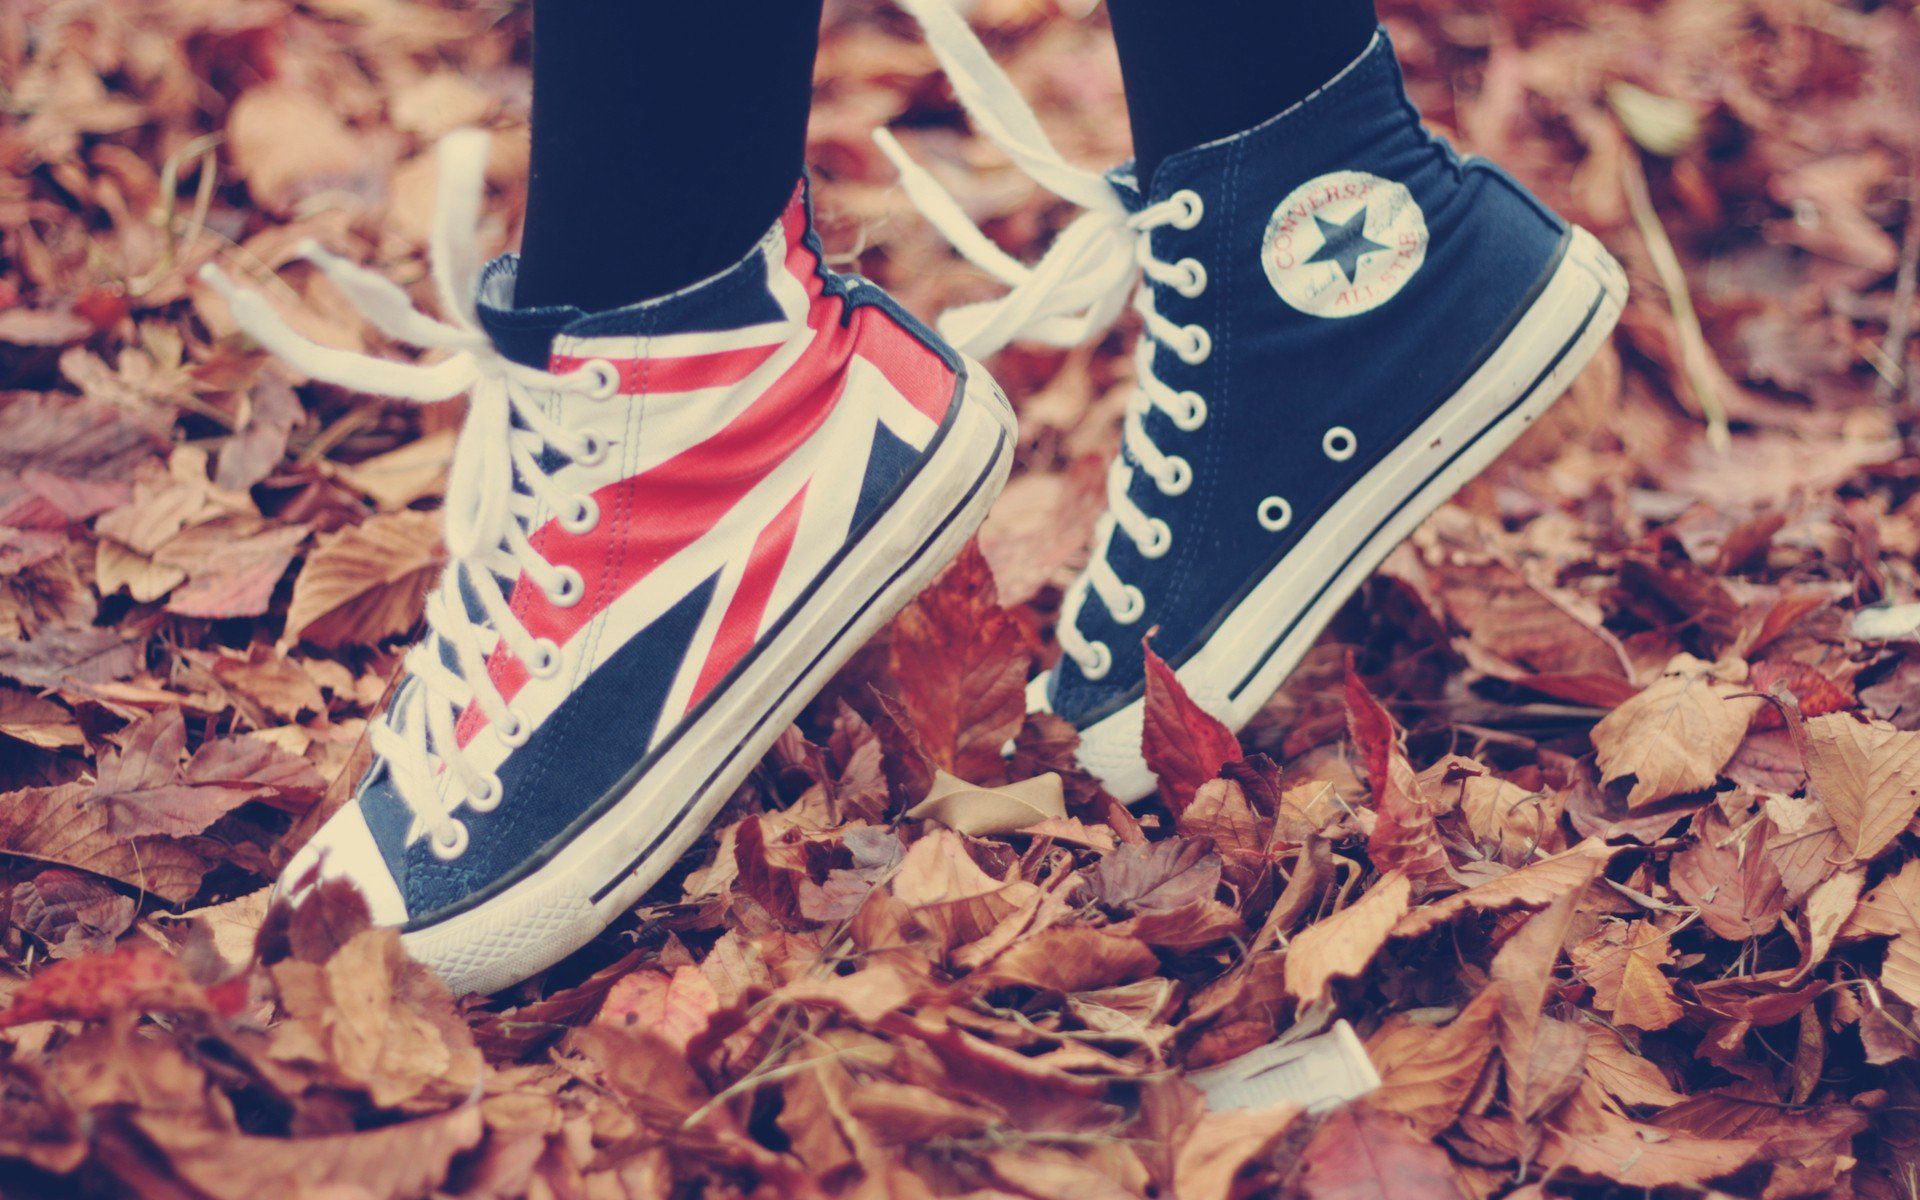 fall, All Star, Fallen leaves, Converse, Union Jack, Shoes, Leaves